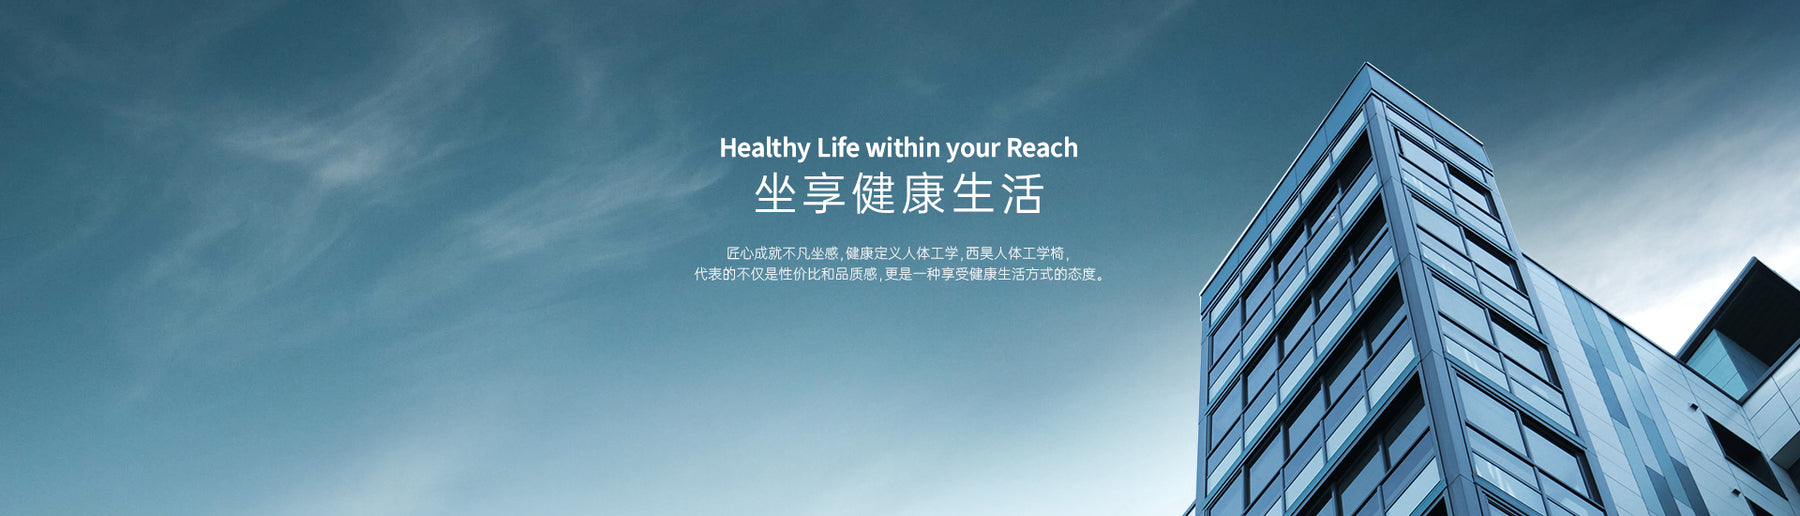 Healthy life within your reach